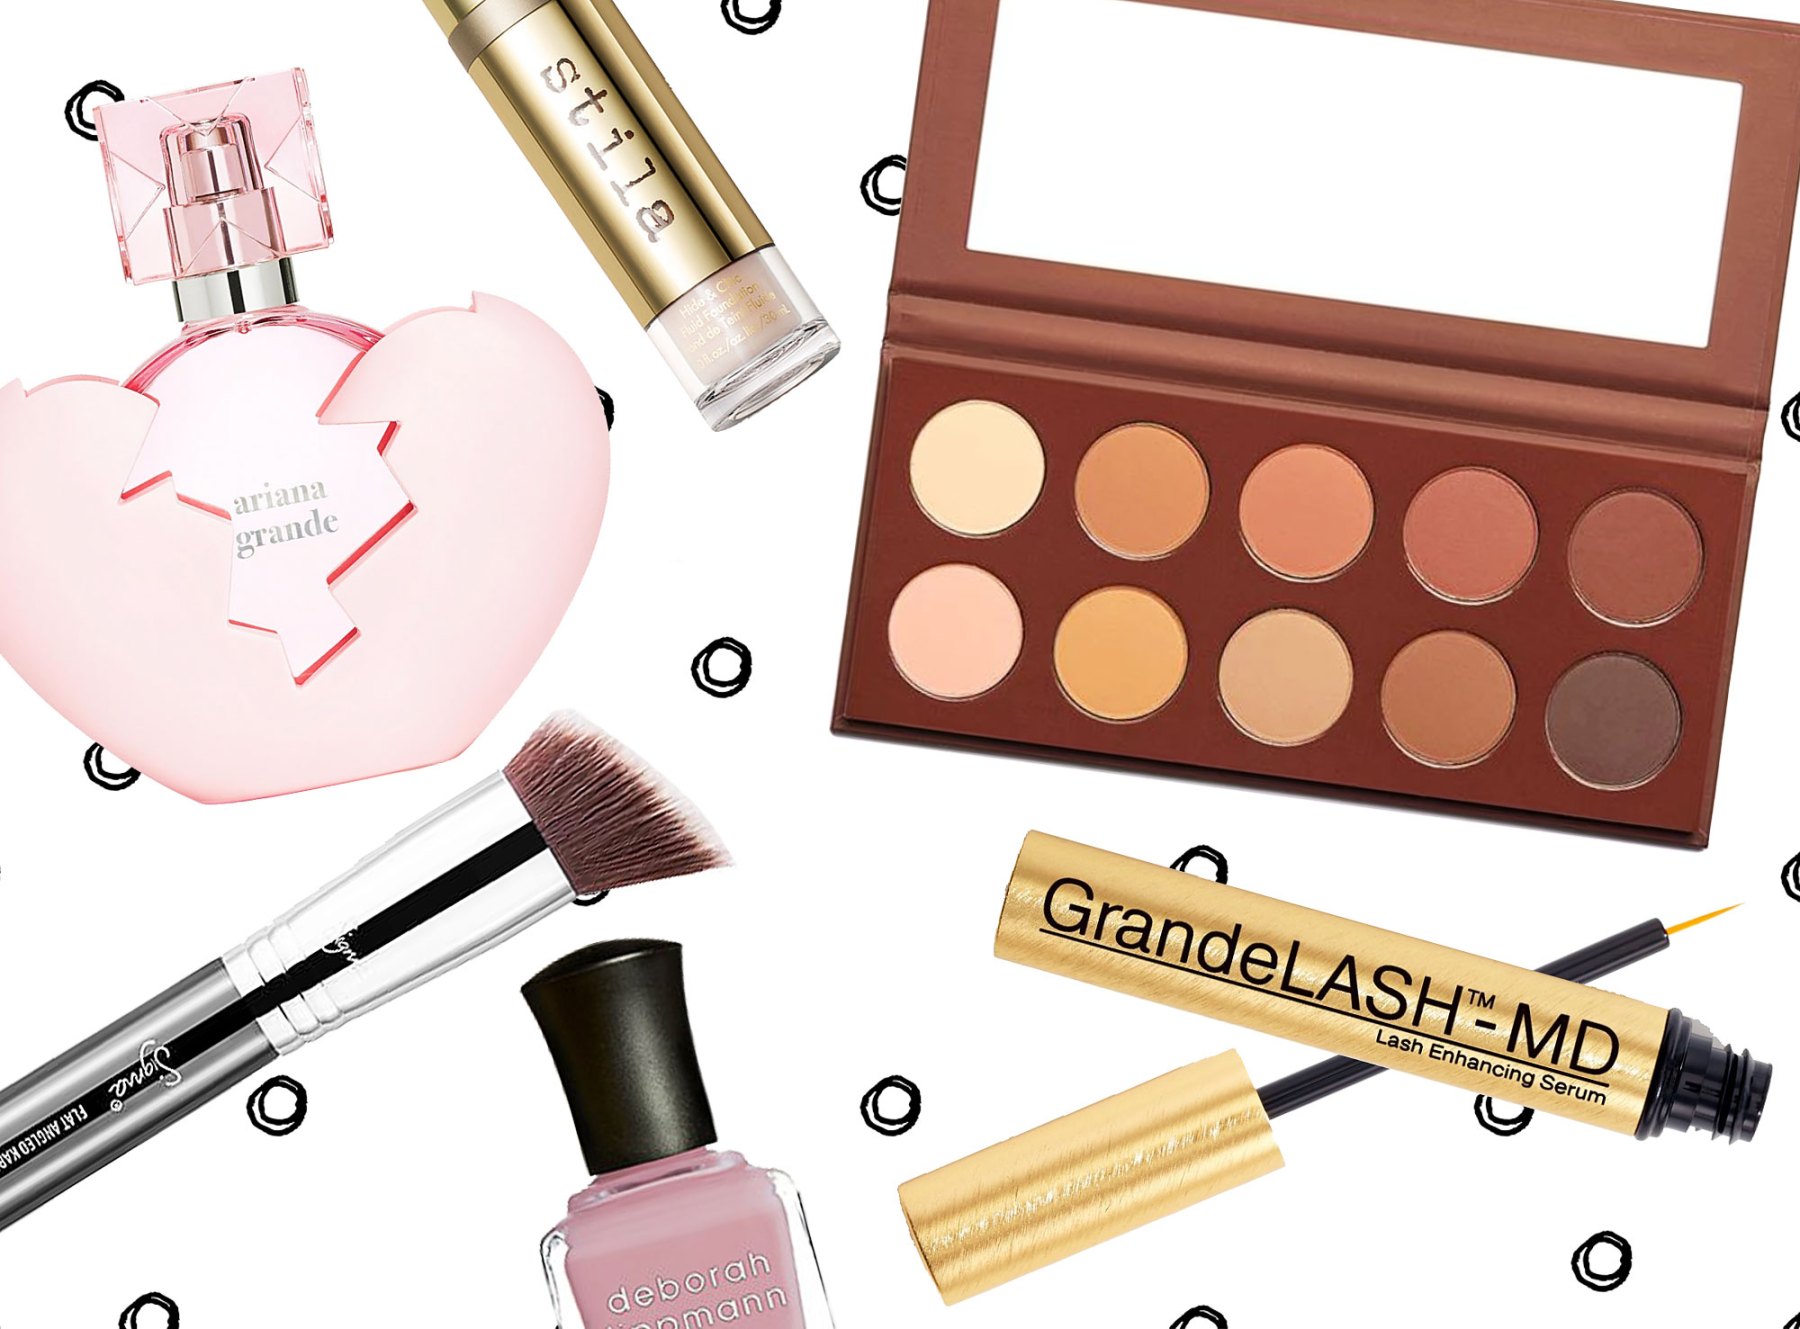 Labor Day Beauty and Makeup Sales 2019 Shopping Guide